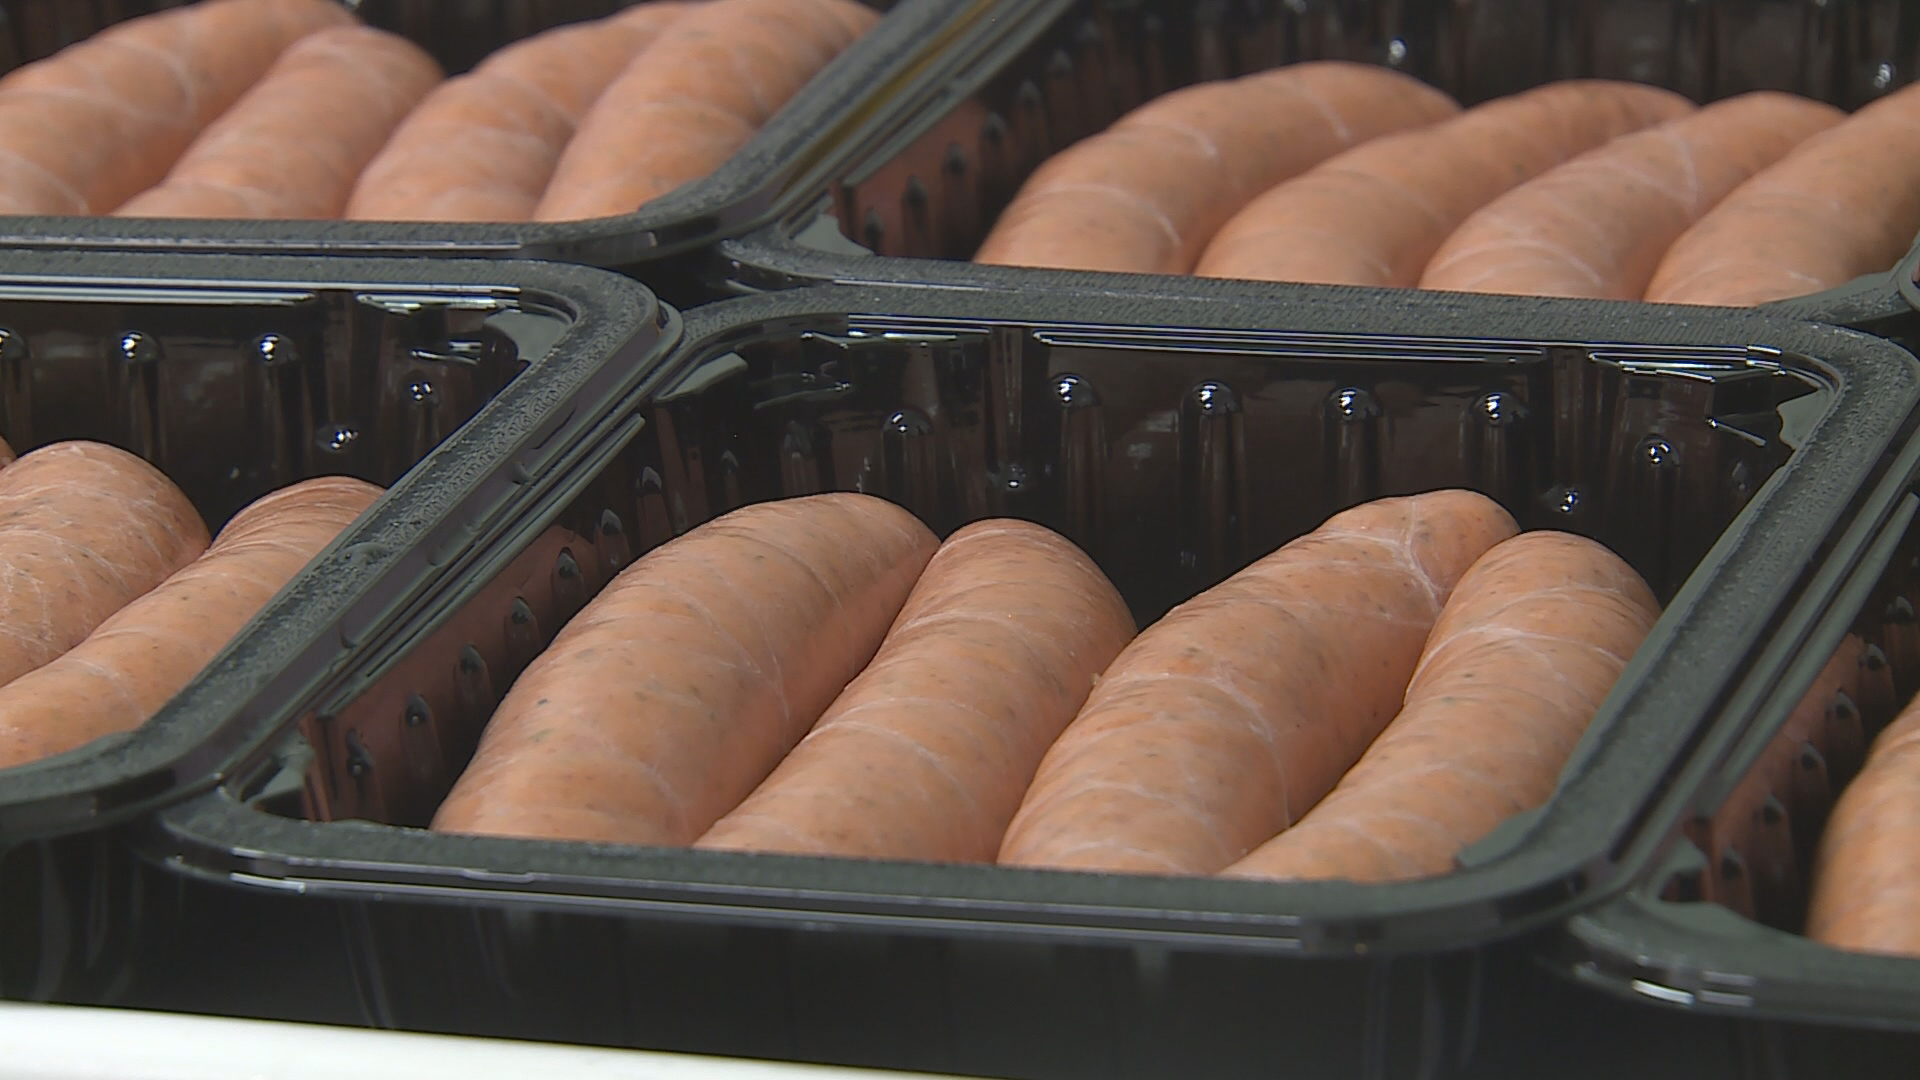 Polidori Sausage will be served at Ball Arena for the first time as part of a partnership between the company and the team.